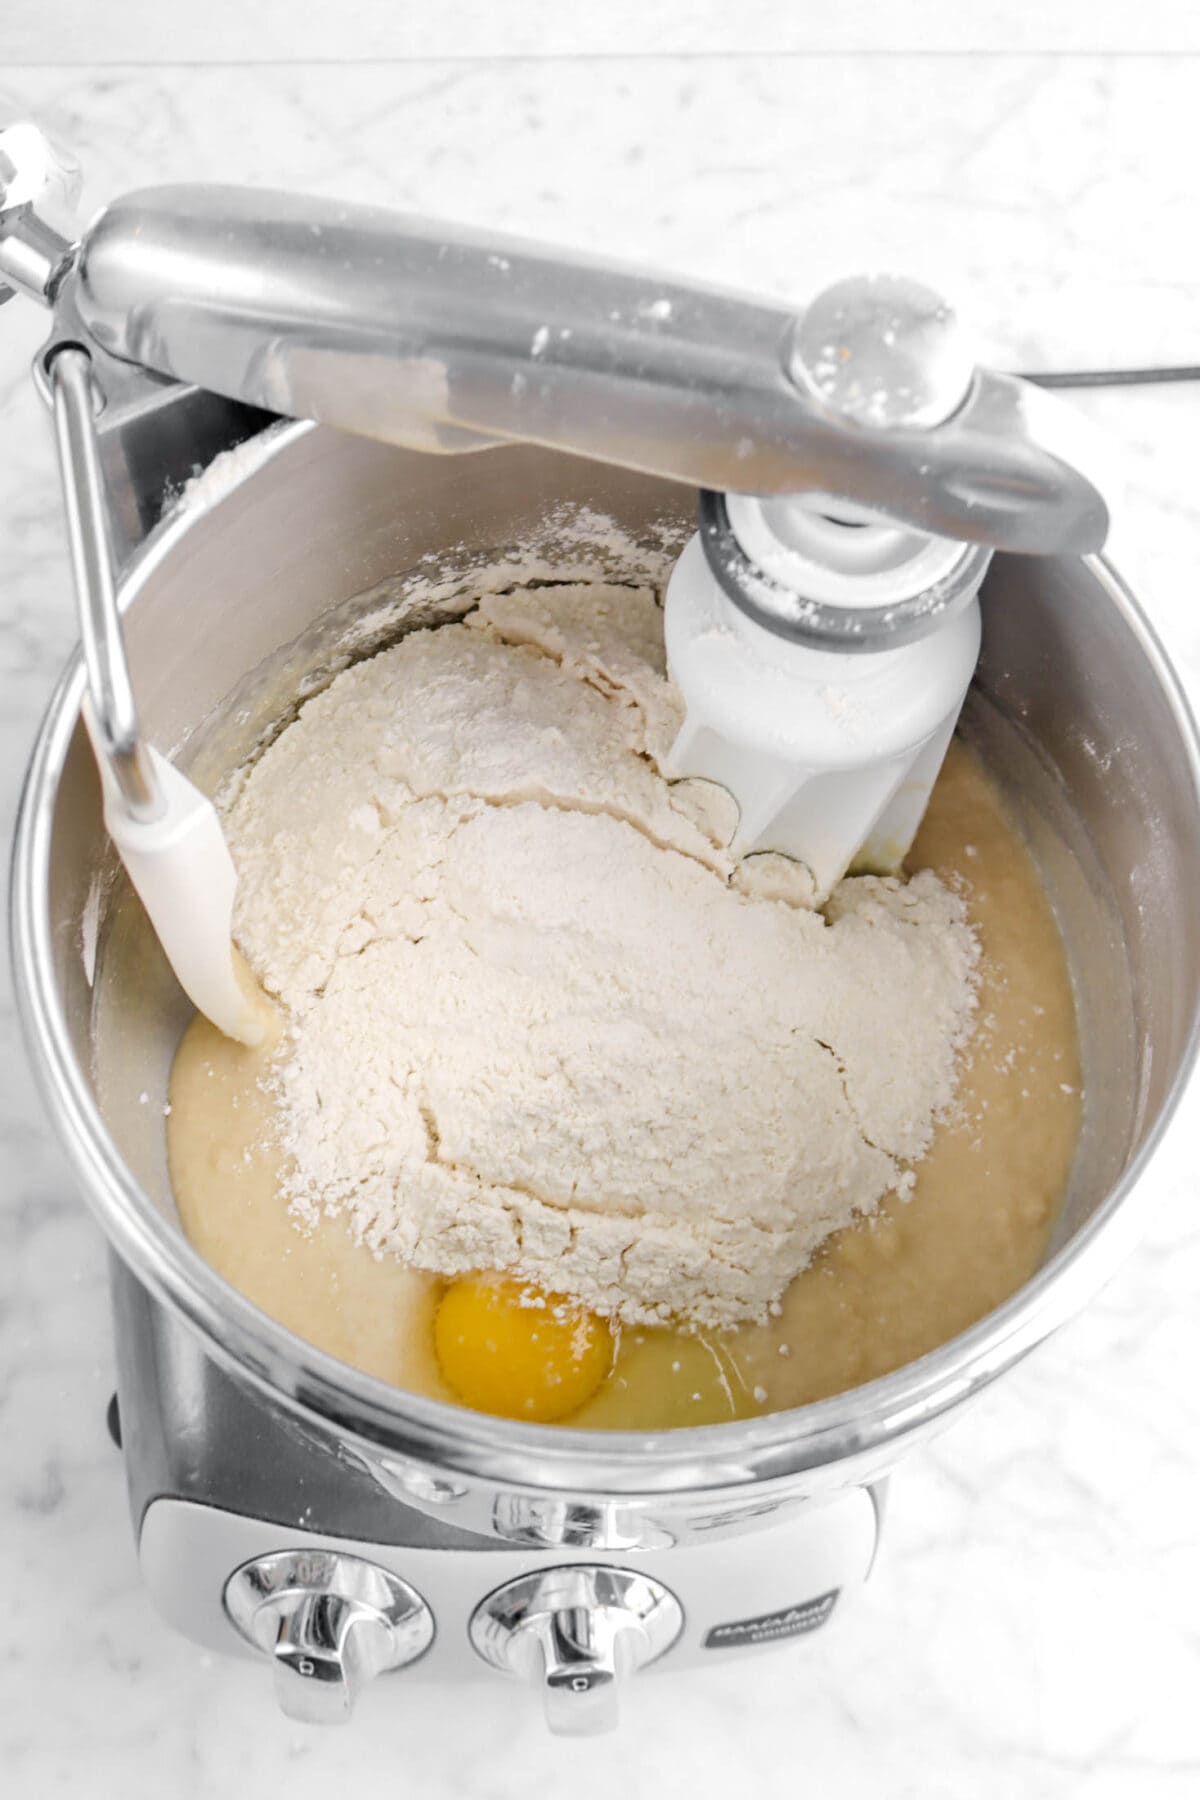 rest of flour and egg added to wet dough